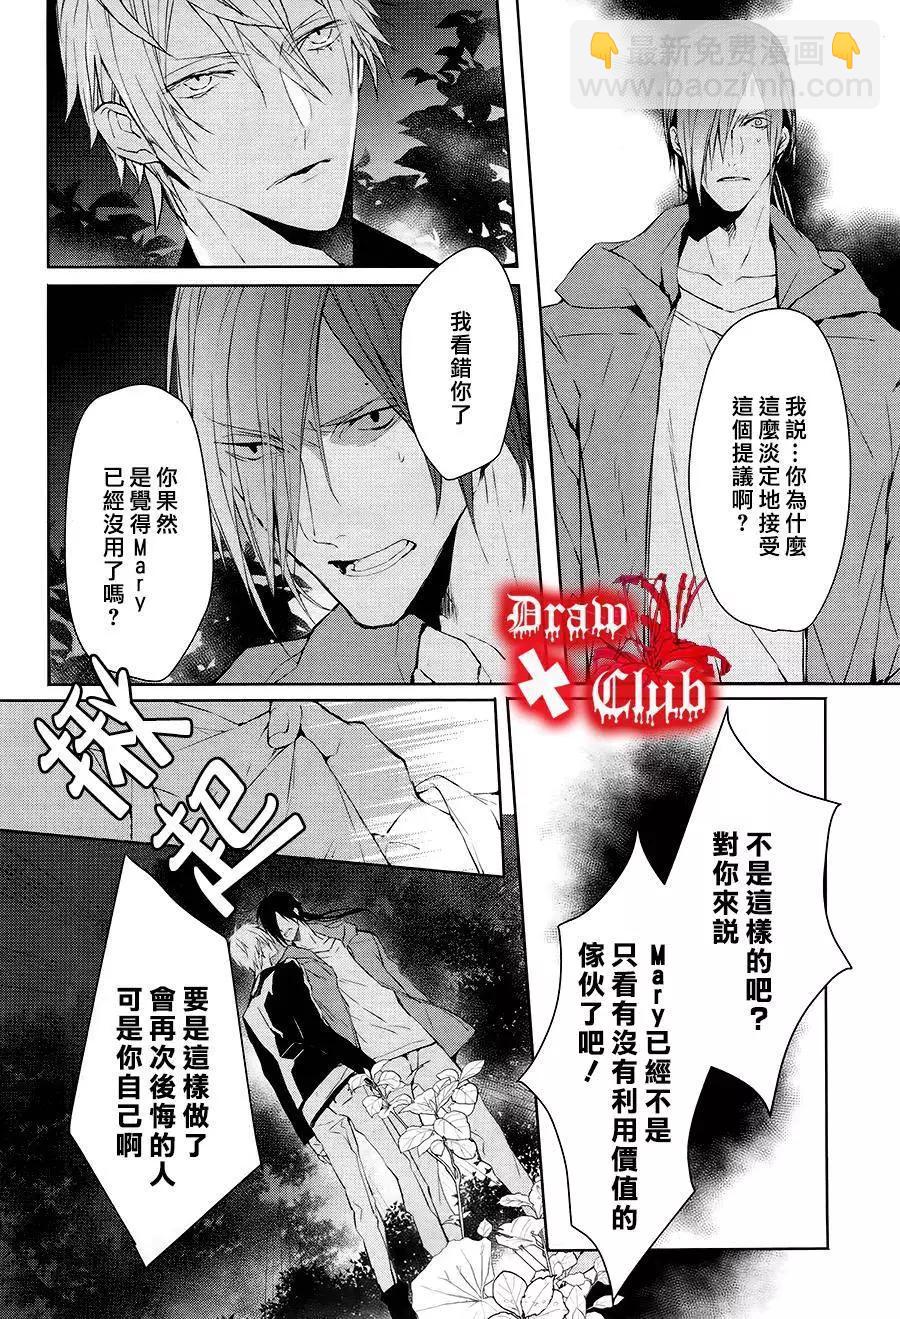 Bloody Mary - 第31回 - 6